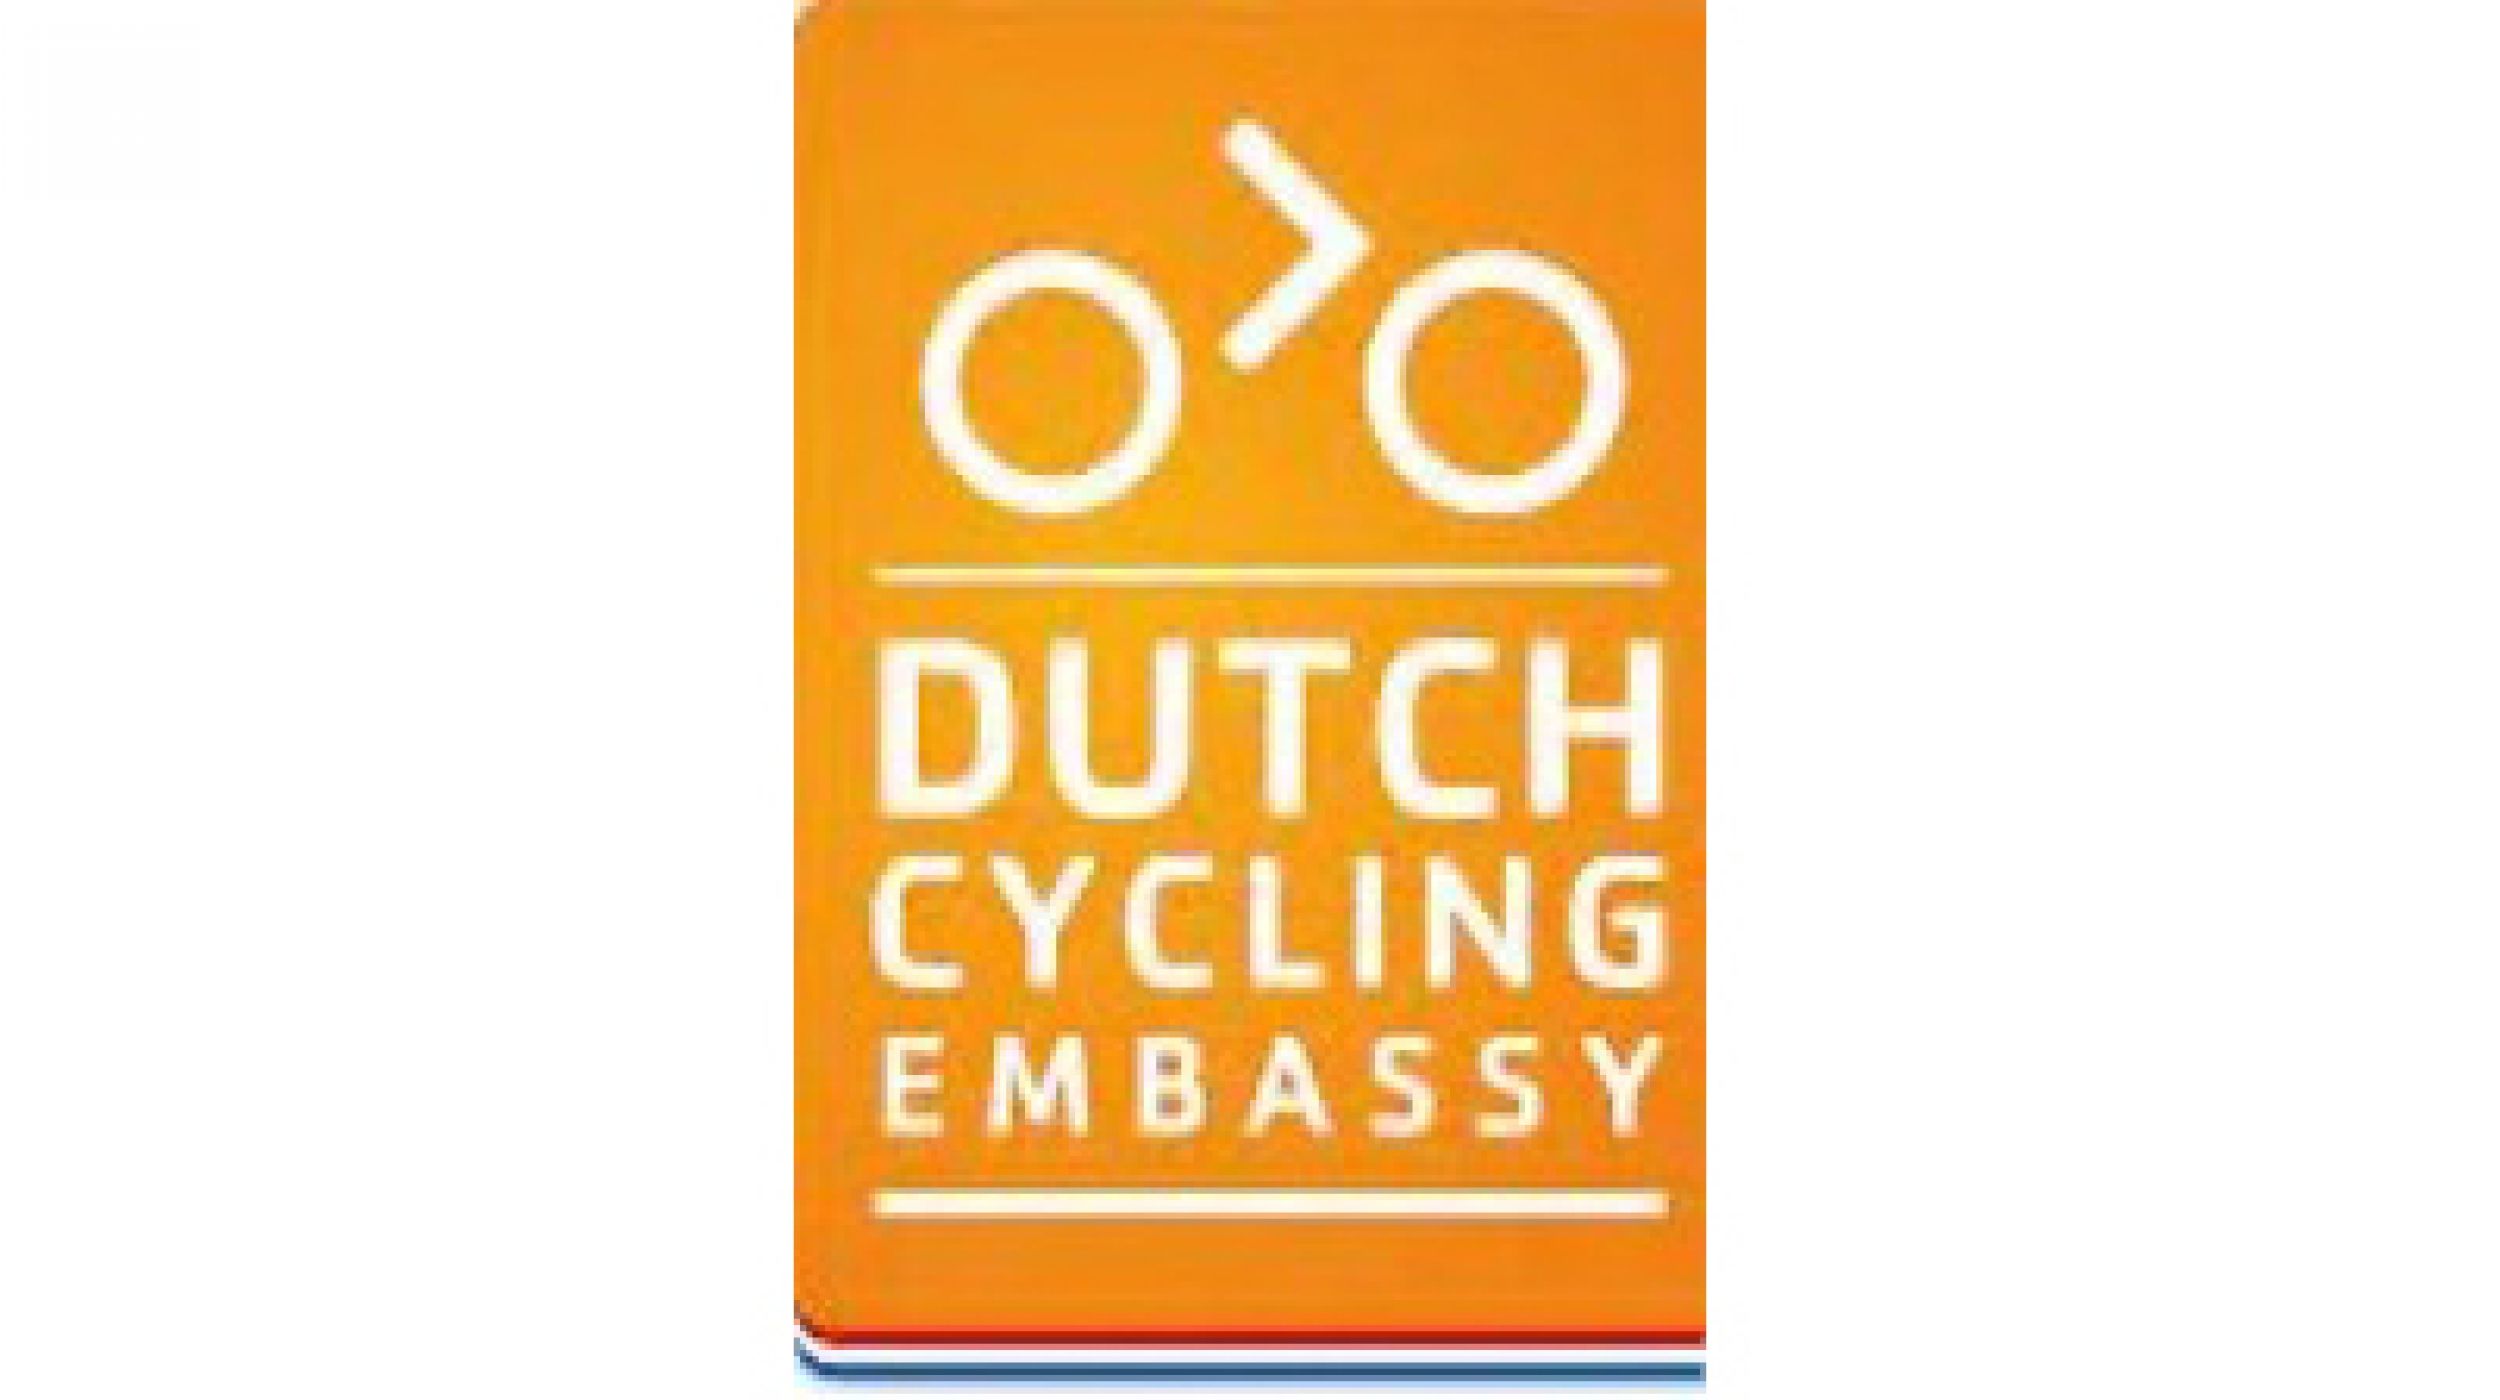 Dickvanveen (re)joins the Dutch Cycling Embassy